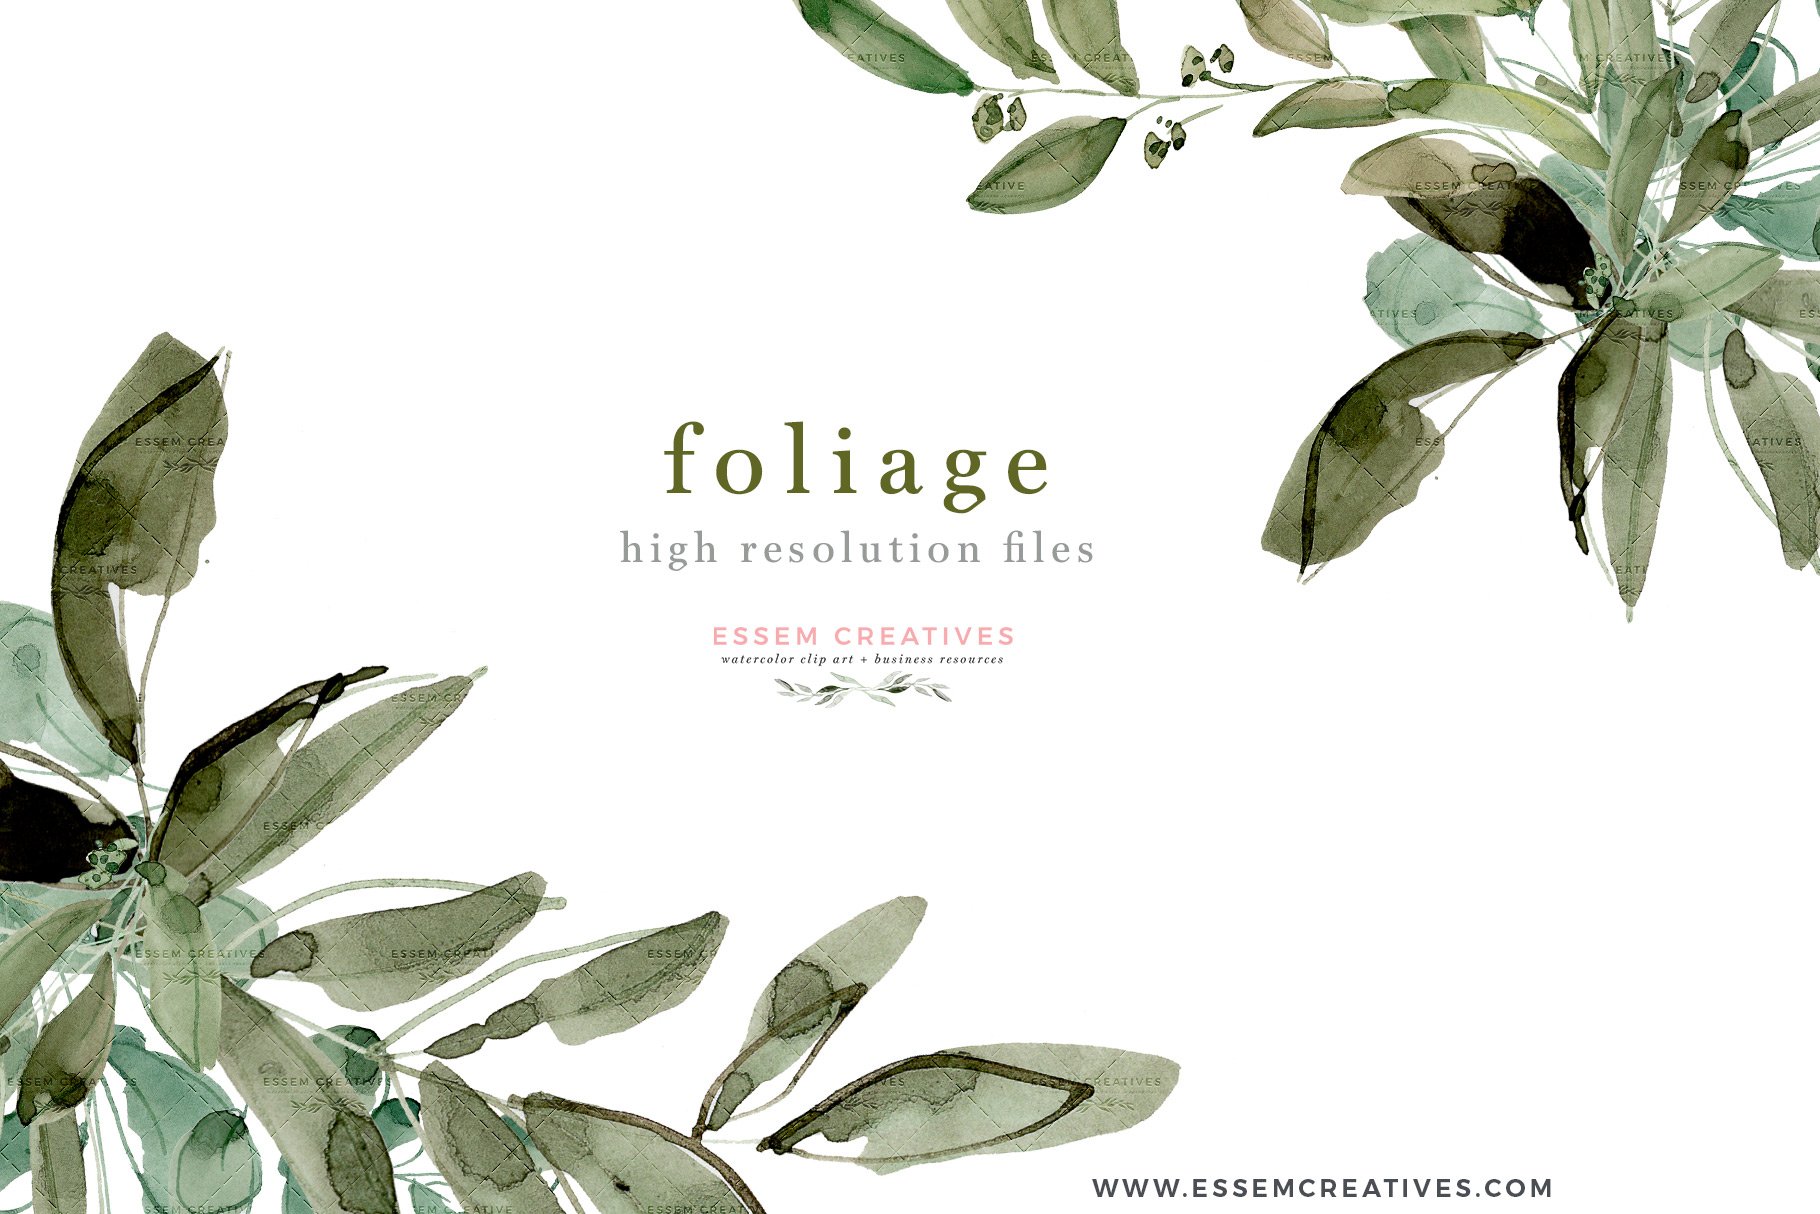 Watercolor painting of foliage with the words foliage high resolution files.